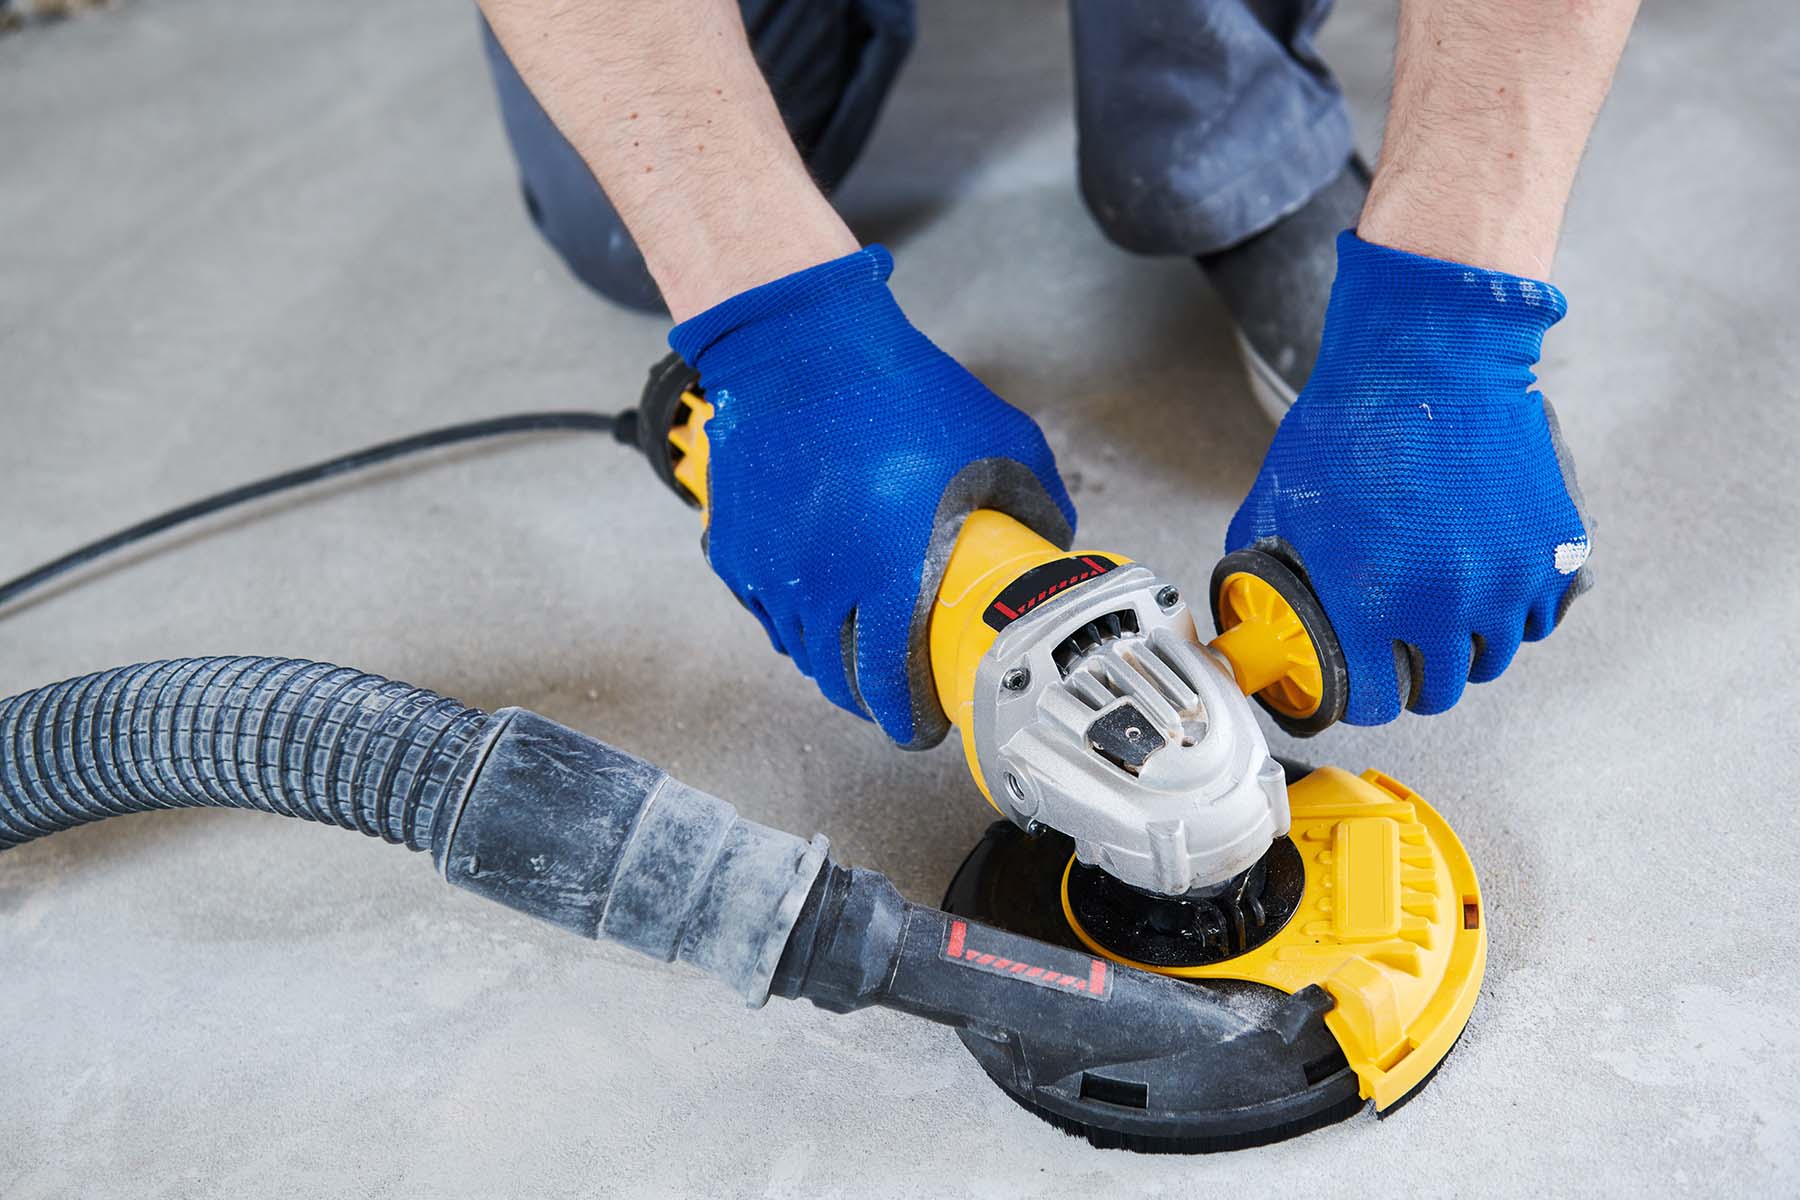 How to Grind Concrete: A Step-by-Step Guide to Concrete Grinding